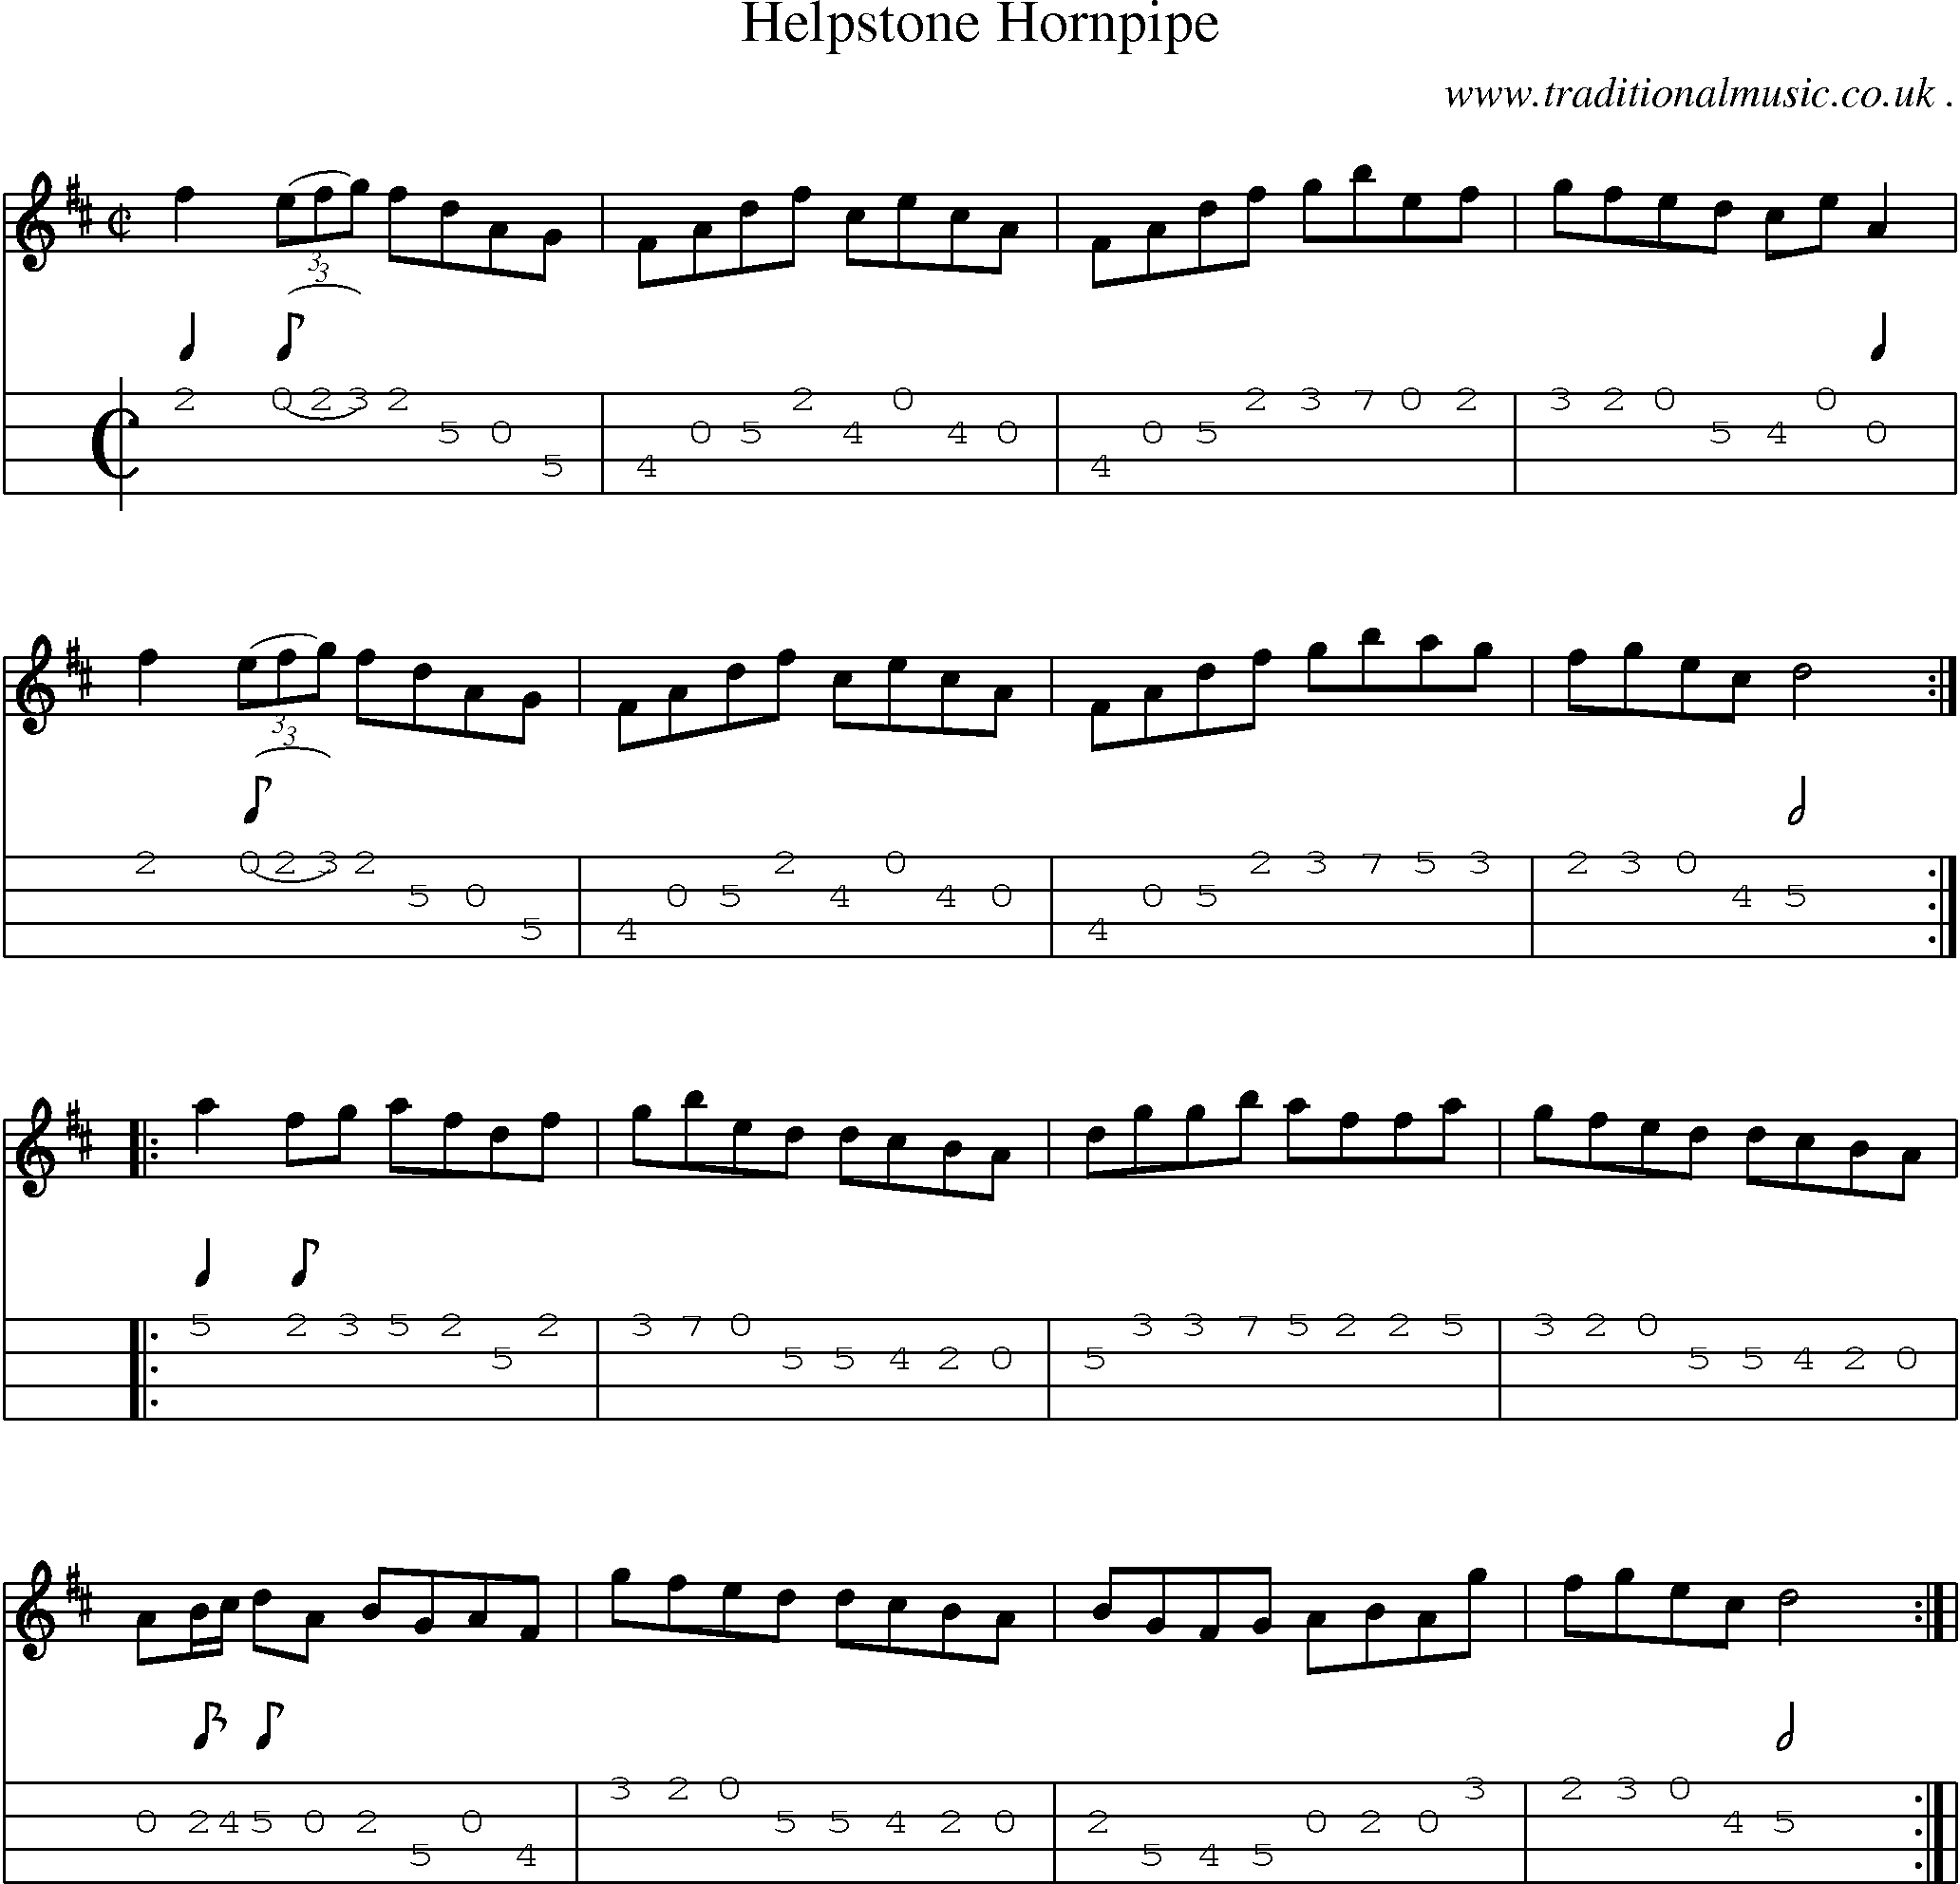 Sheet-Music and Mandolin Tabs for Helpstone Hornpipe